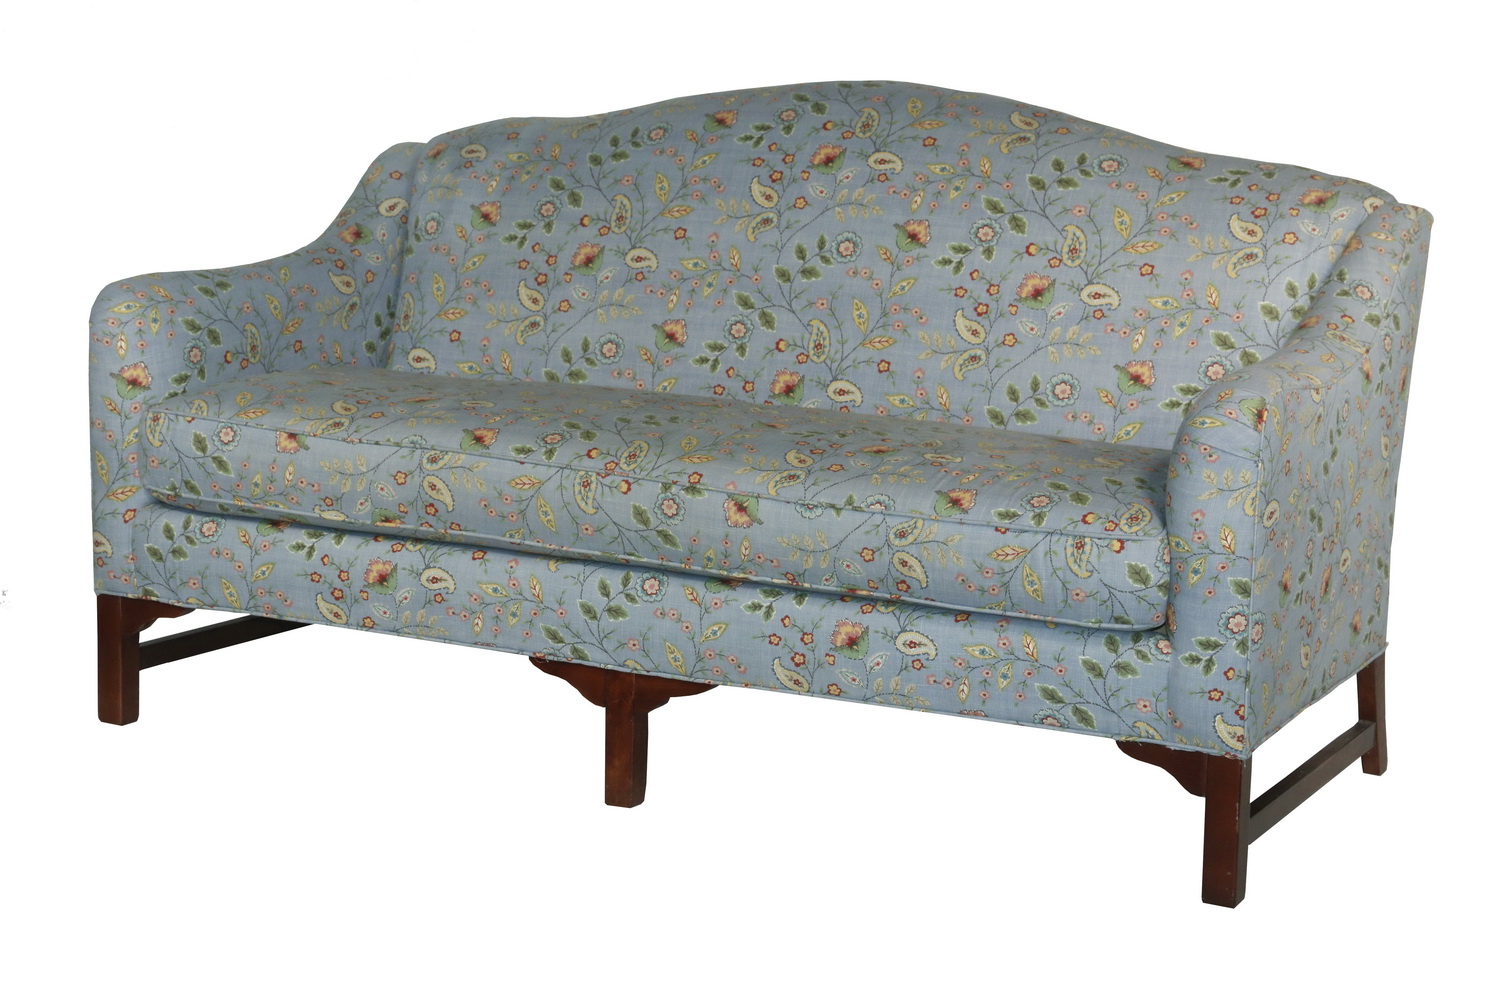 CHIPPENDALE STYLE SOFA Custom Chippendale 2b516c